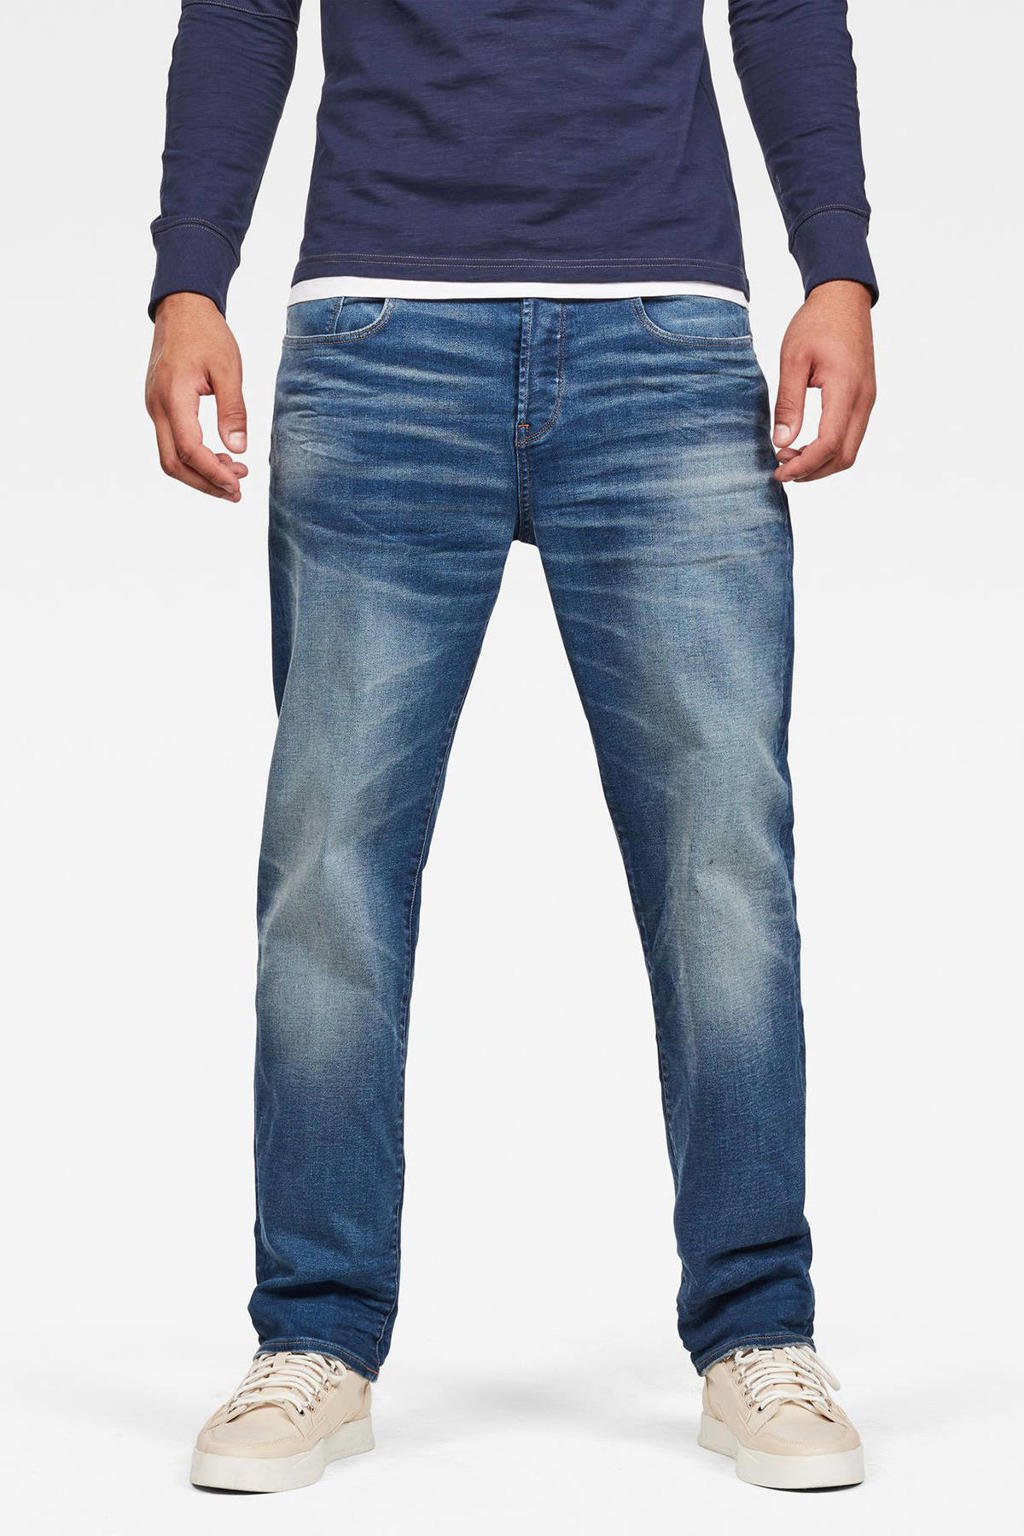 G-Star RAW 3301 relaxed fit jeans worker blue faded